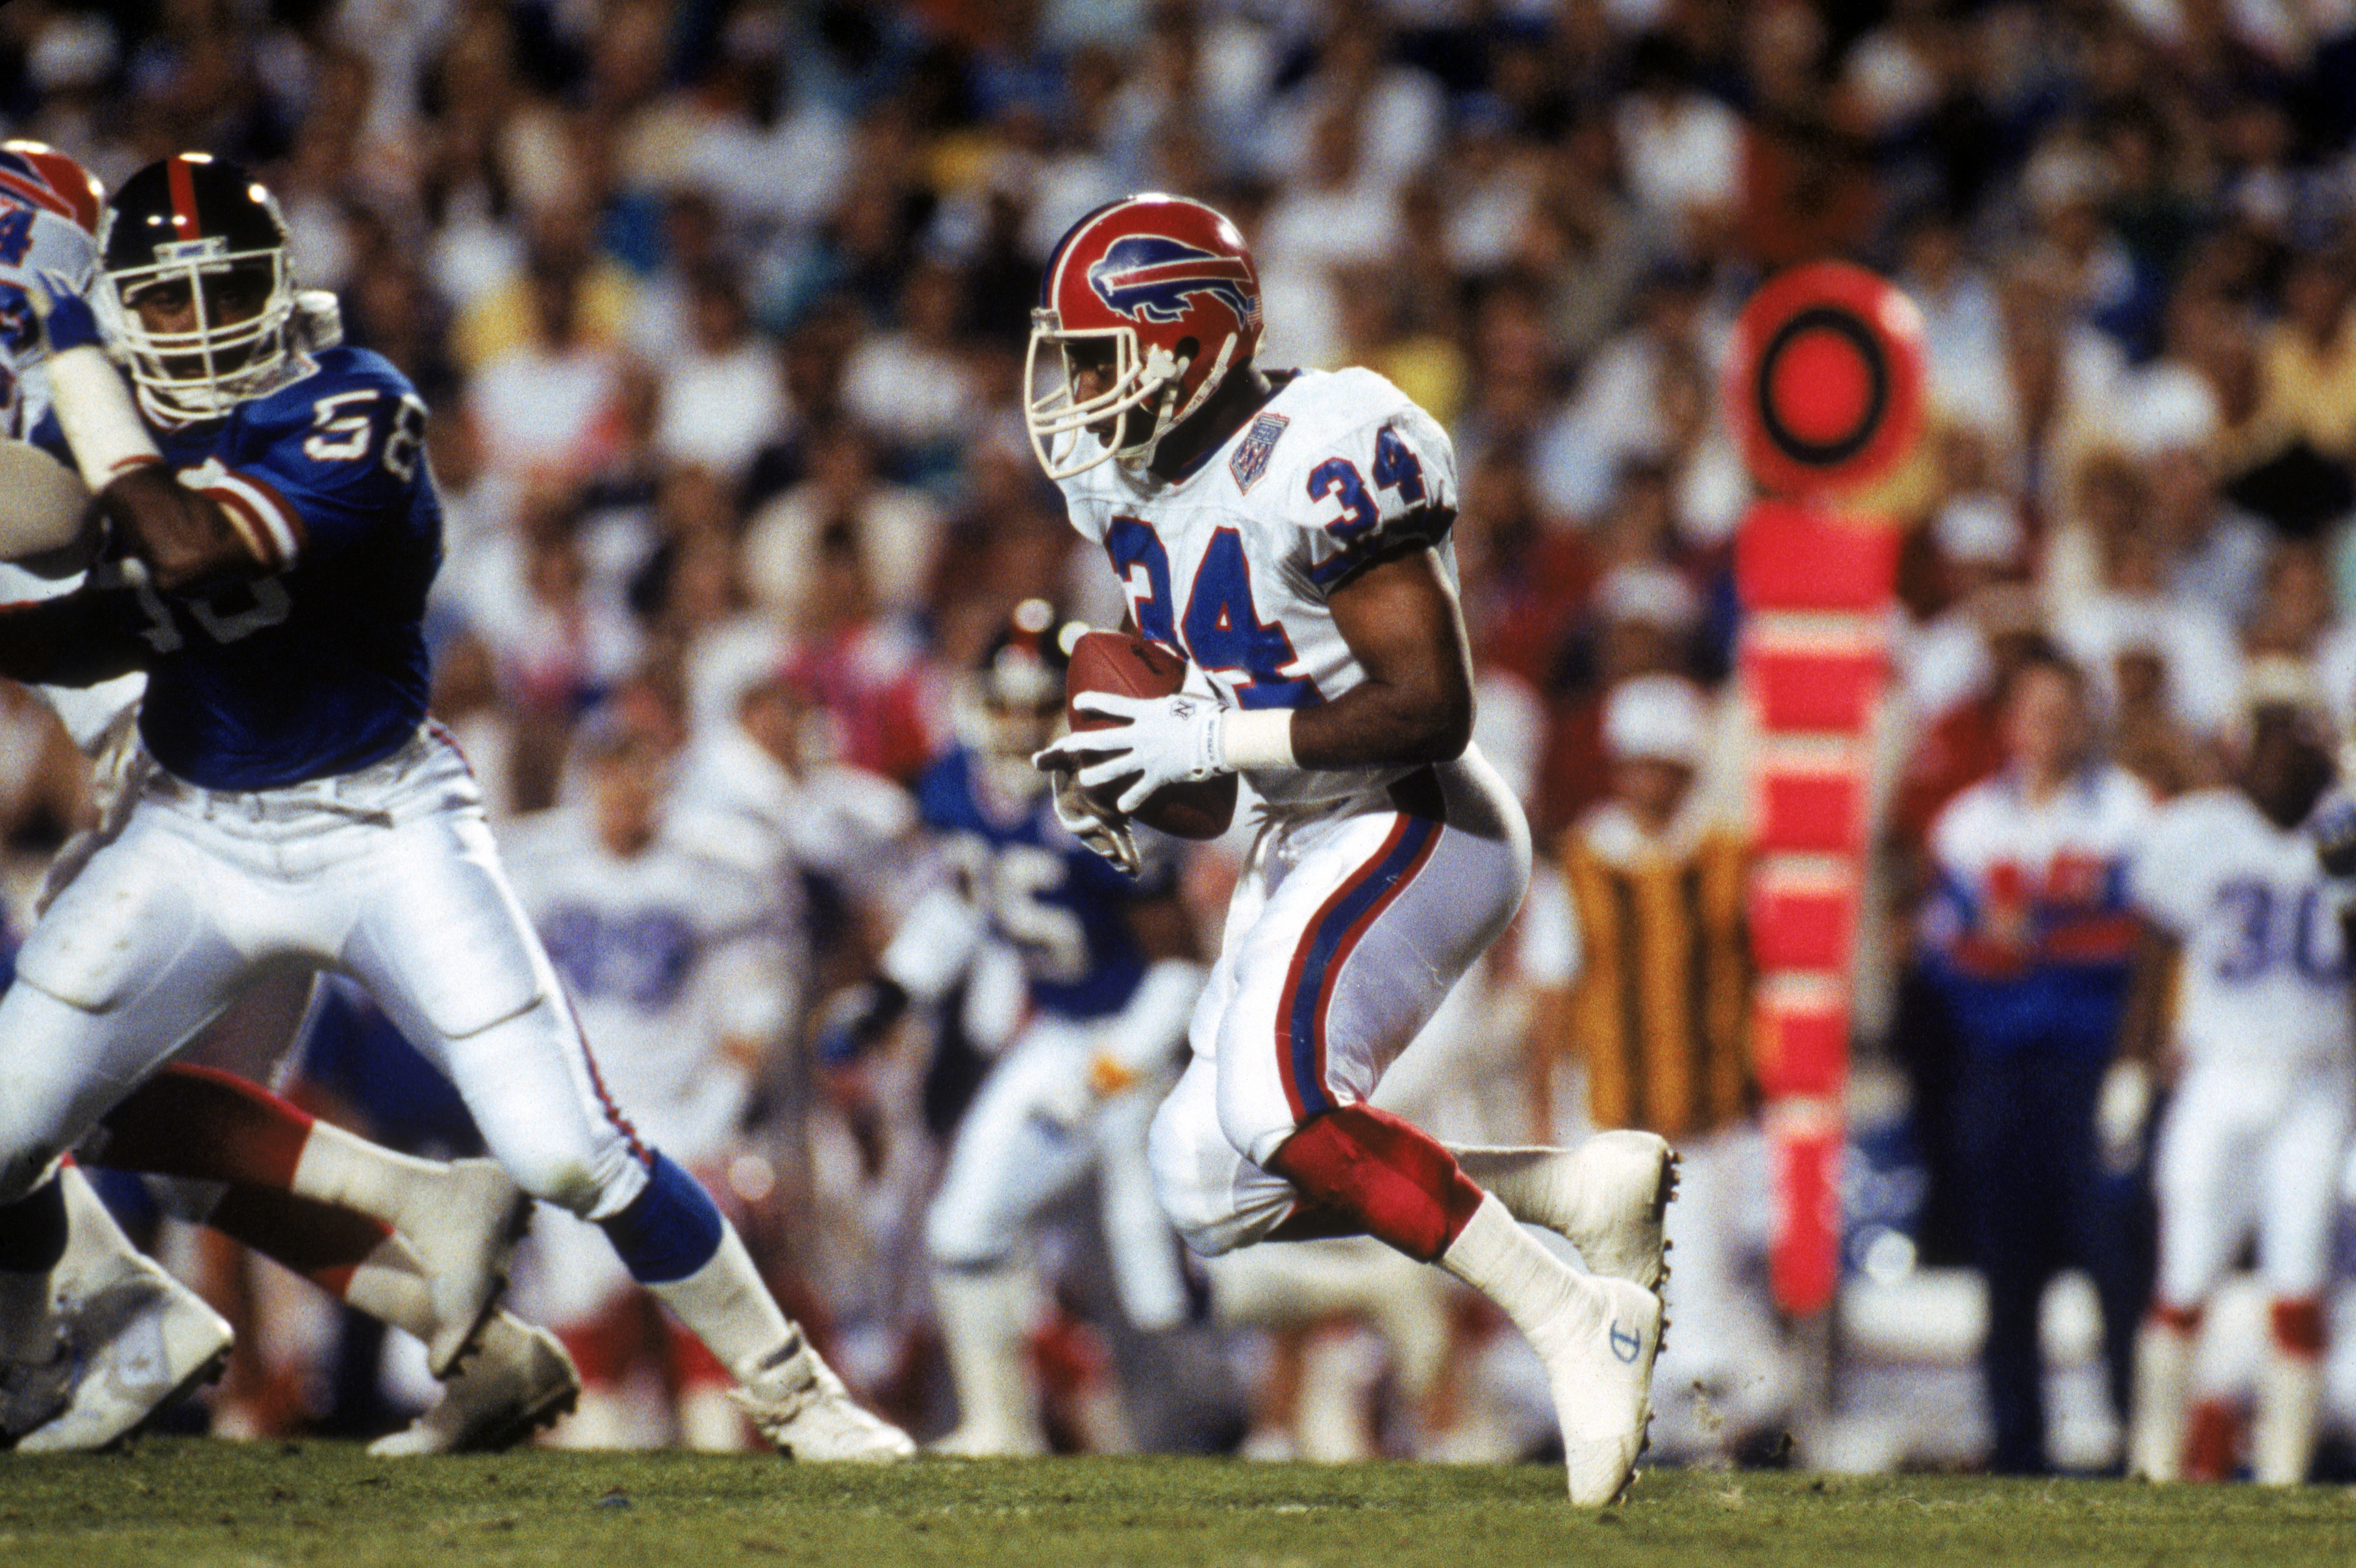 TAMPA, FL - JANUARY 27:  Running back Thurman Thomas #34 of the Buffalo Bills hustles for yards in Super Bowl XXV against the New York Giants at Tampa Stadium on January 27, 1991 in Tampa, Florida.  The Giants won 20-19.  (Photo by George Rose/Getty Image